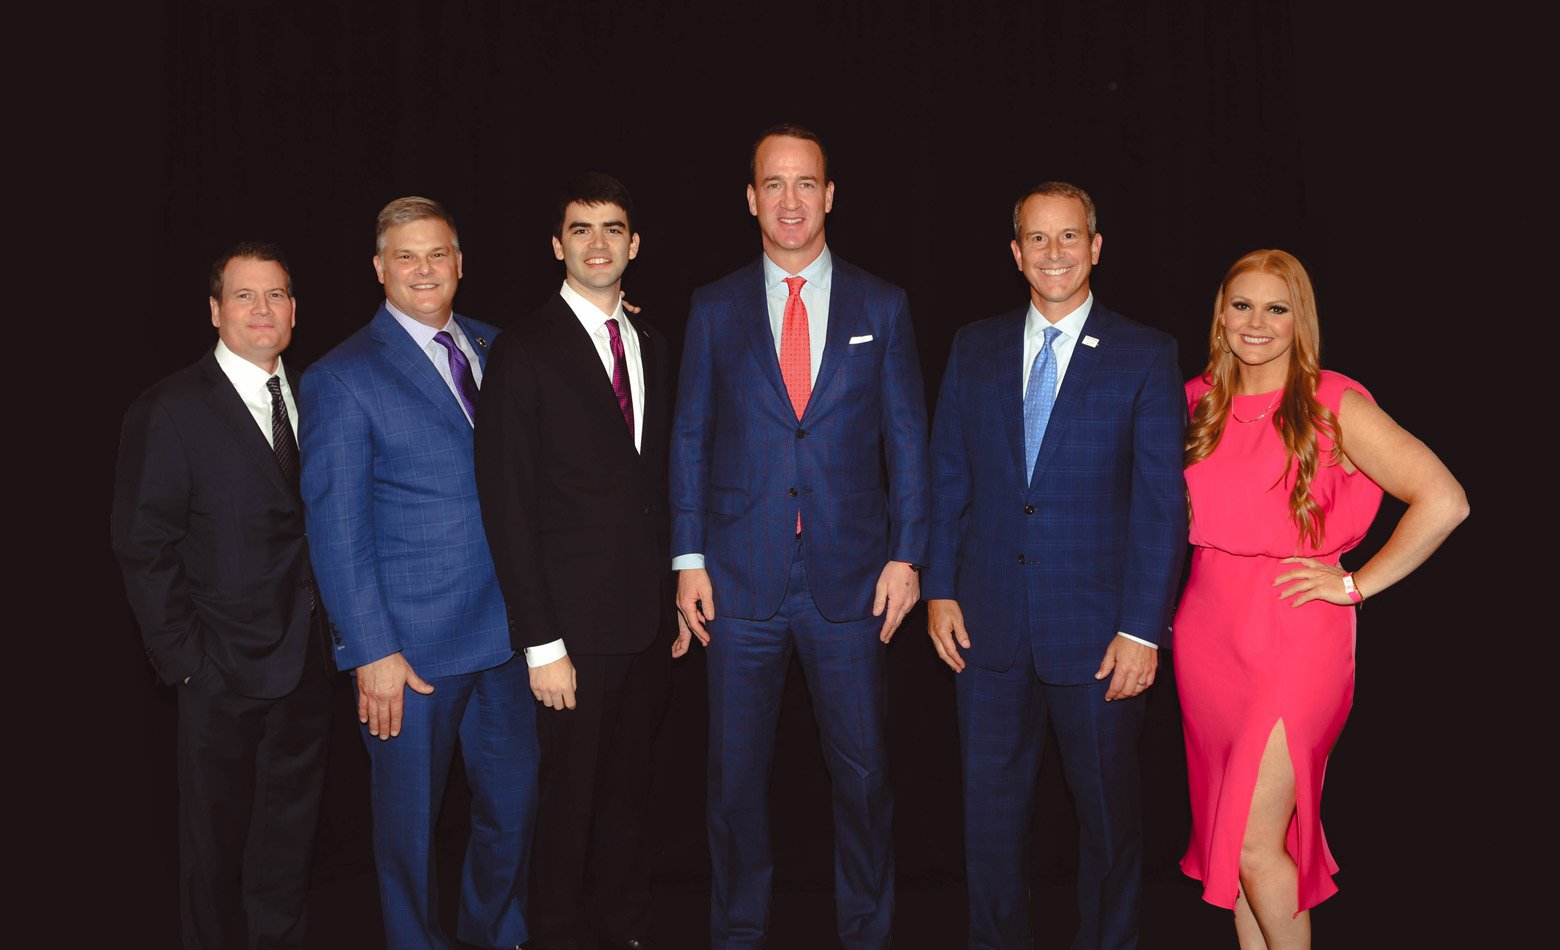 image-community-cooke-financial-wealth-management-team-with-peyton-manning-image-1-1